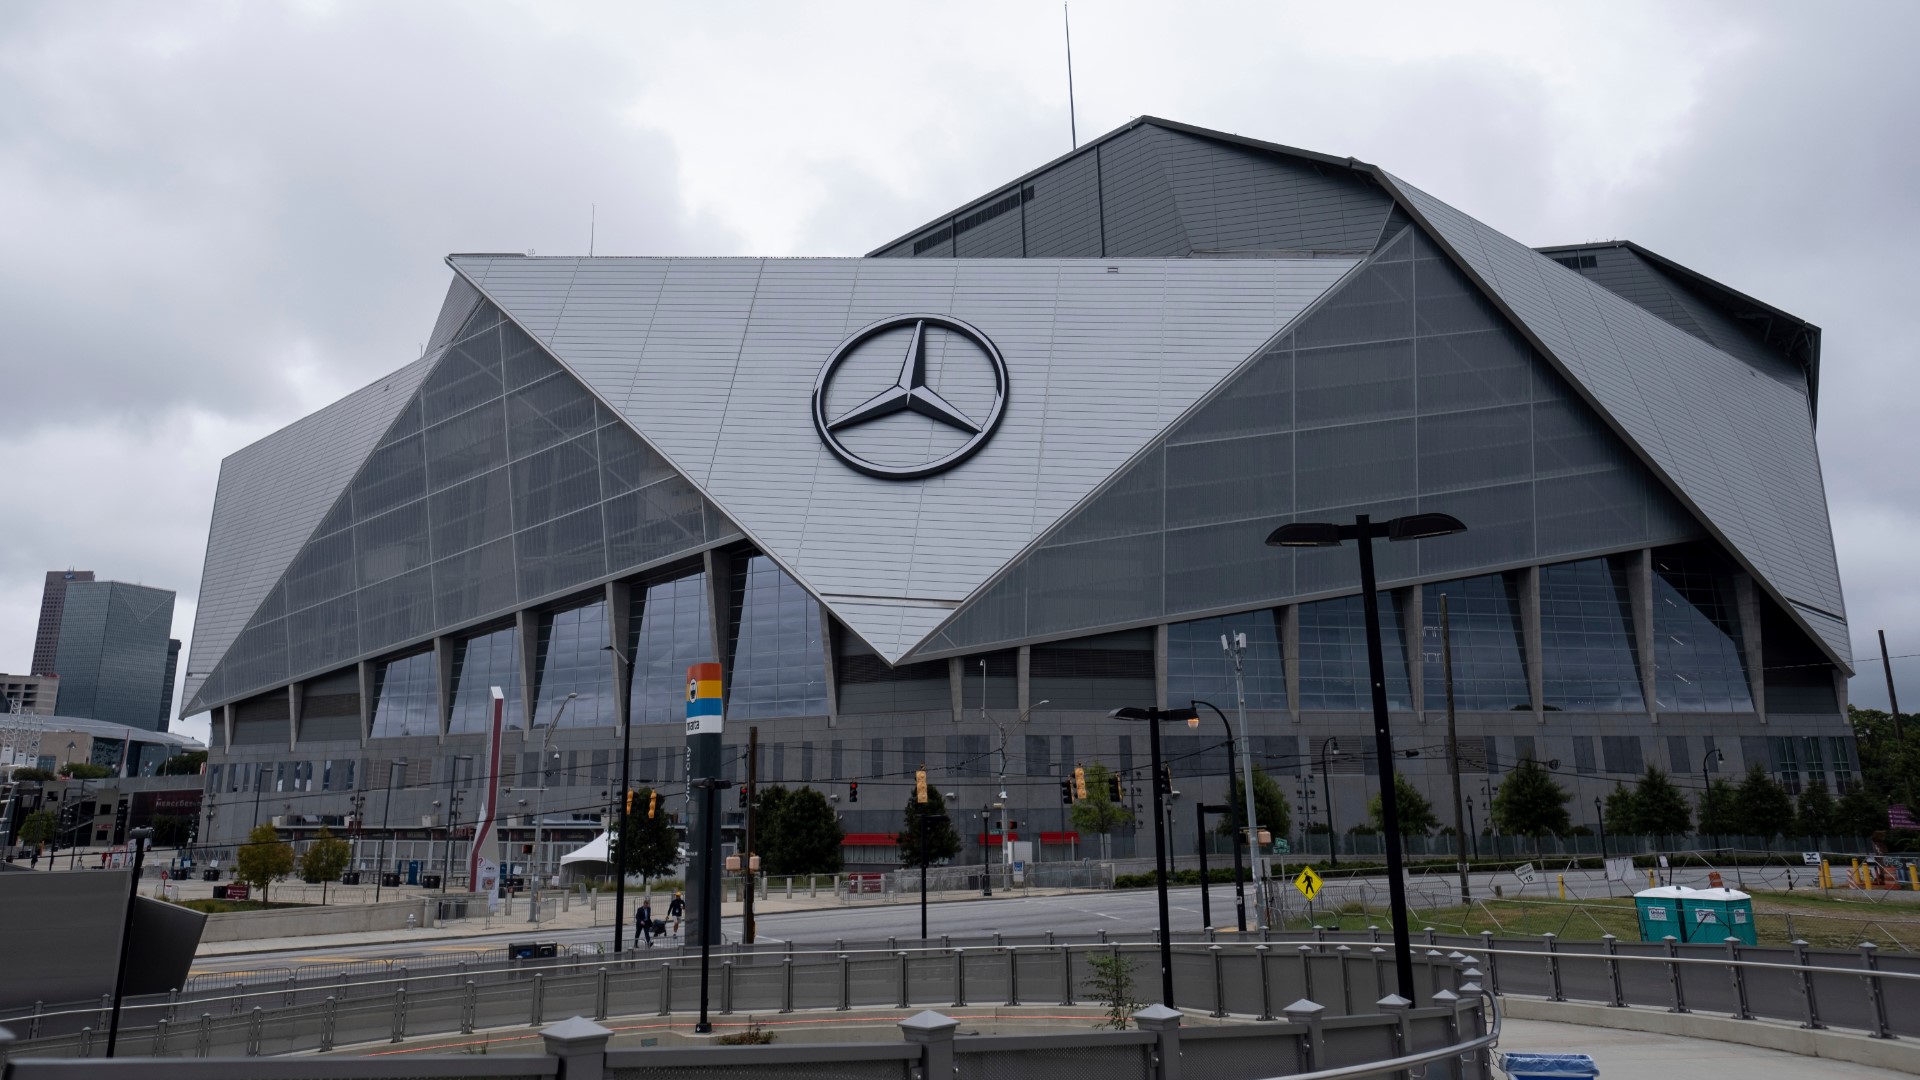 Soccer fans from across the world will visit Atlanta in 2026 for eight World Cup matches, including a semifinal match, that will all happen at the Benz.